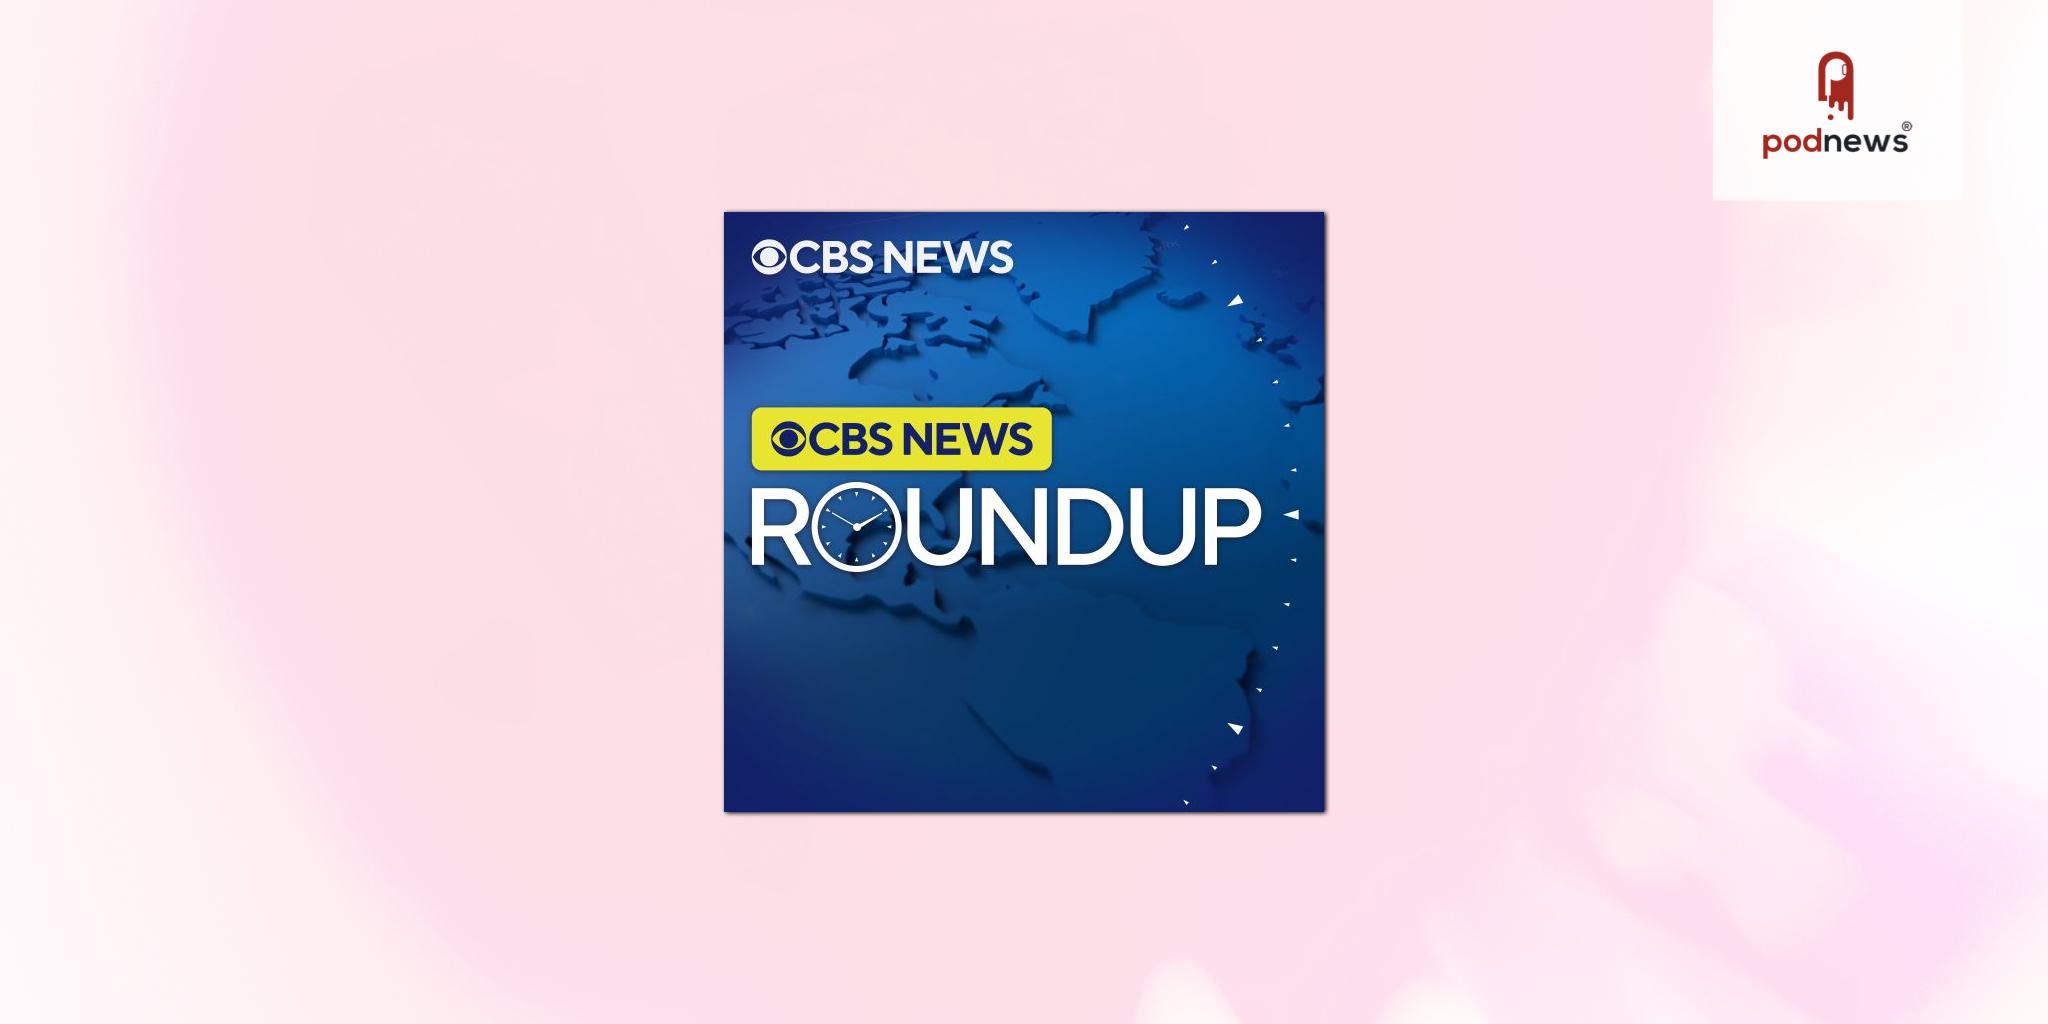 CBS News Radio to mark the 85th anniversary of World News Roundup with special programming